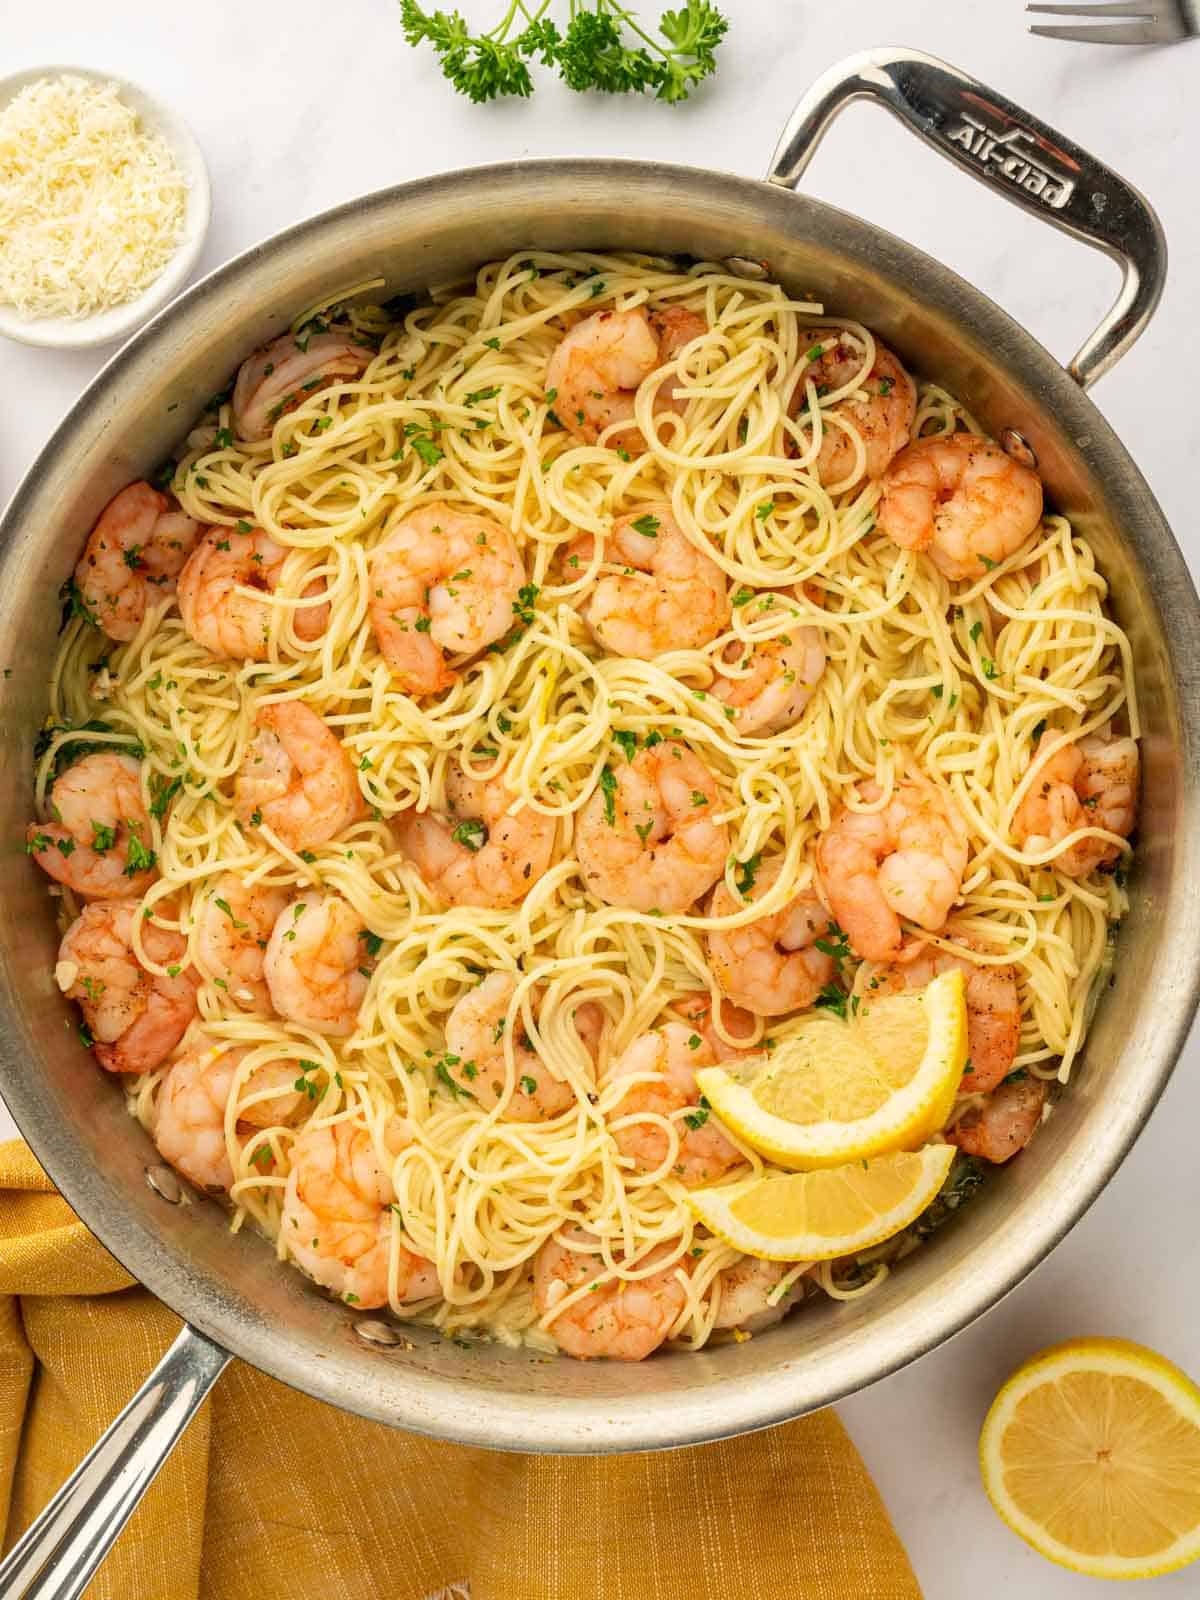 A skillet of pasta and shrimp.